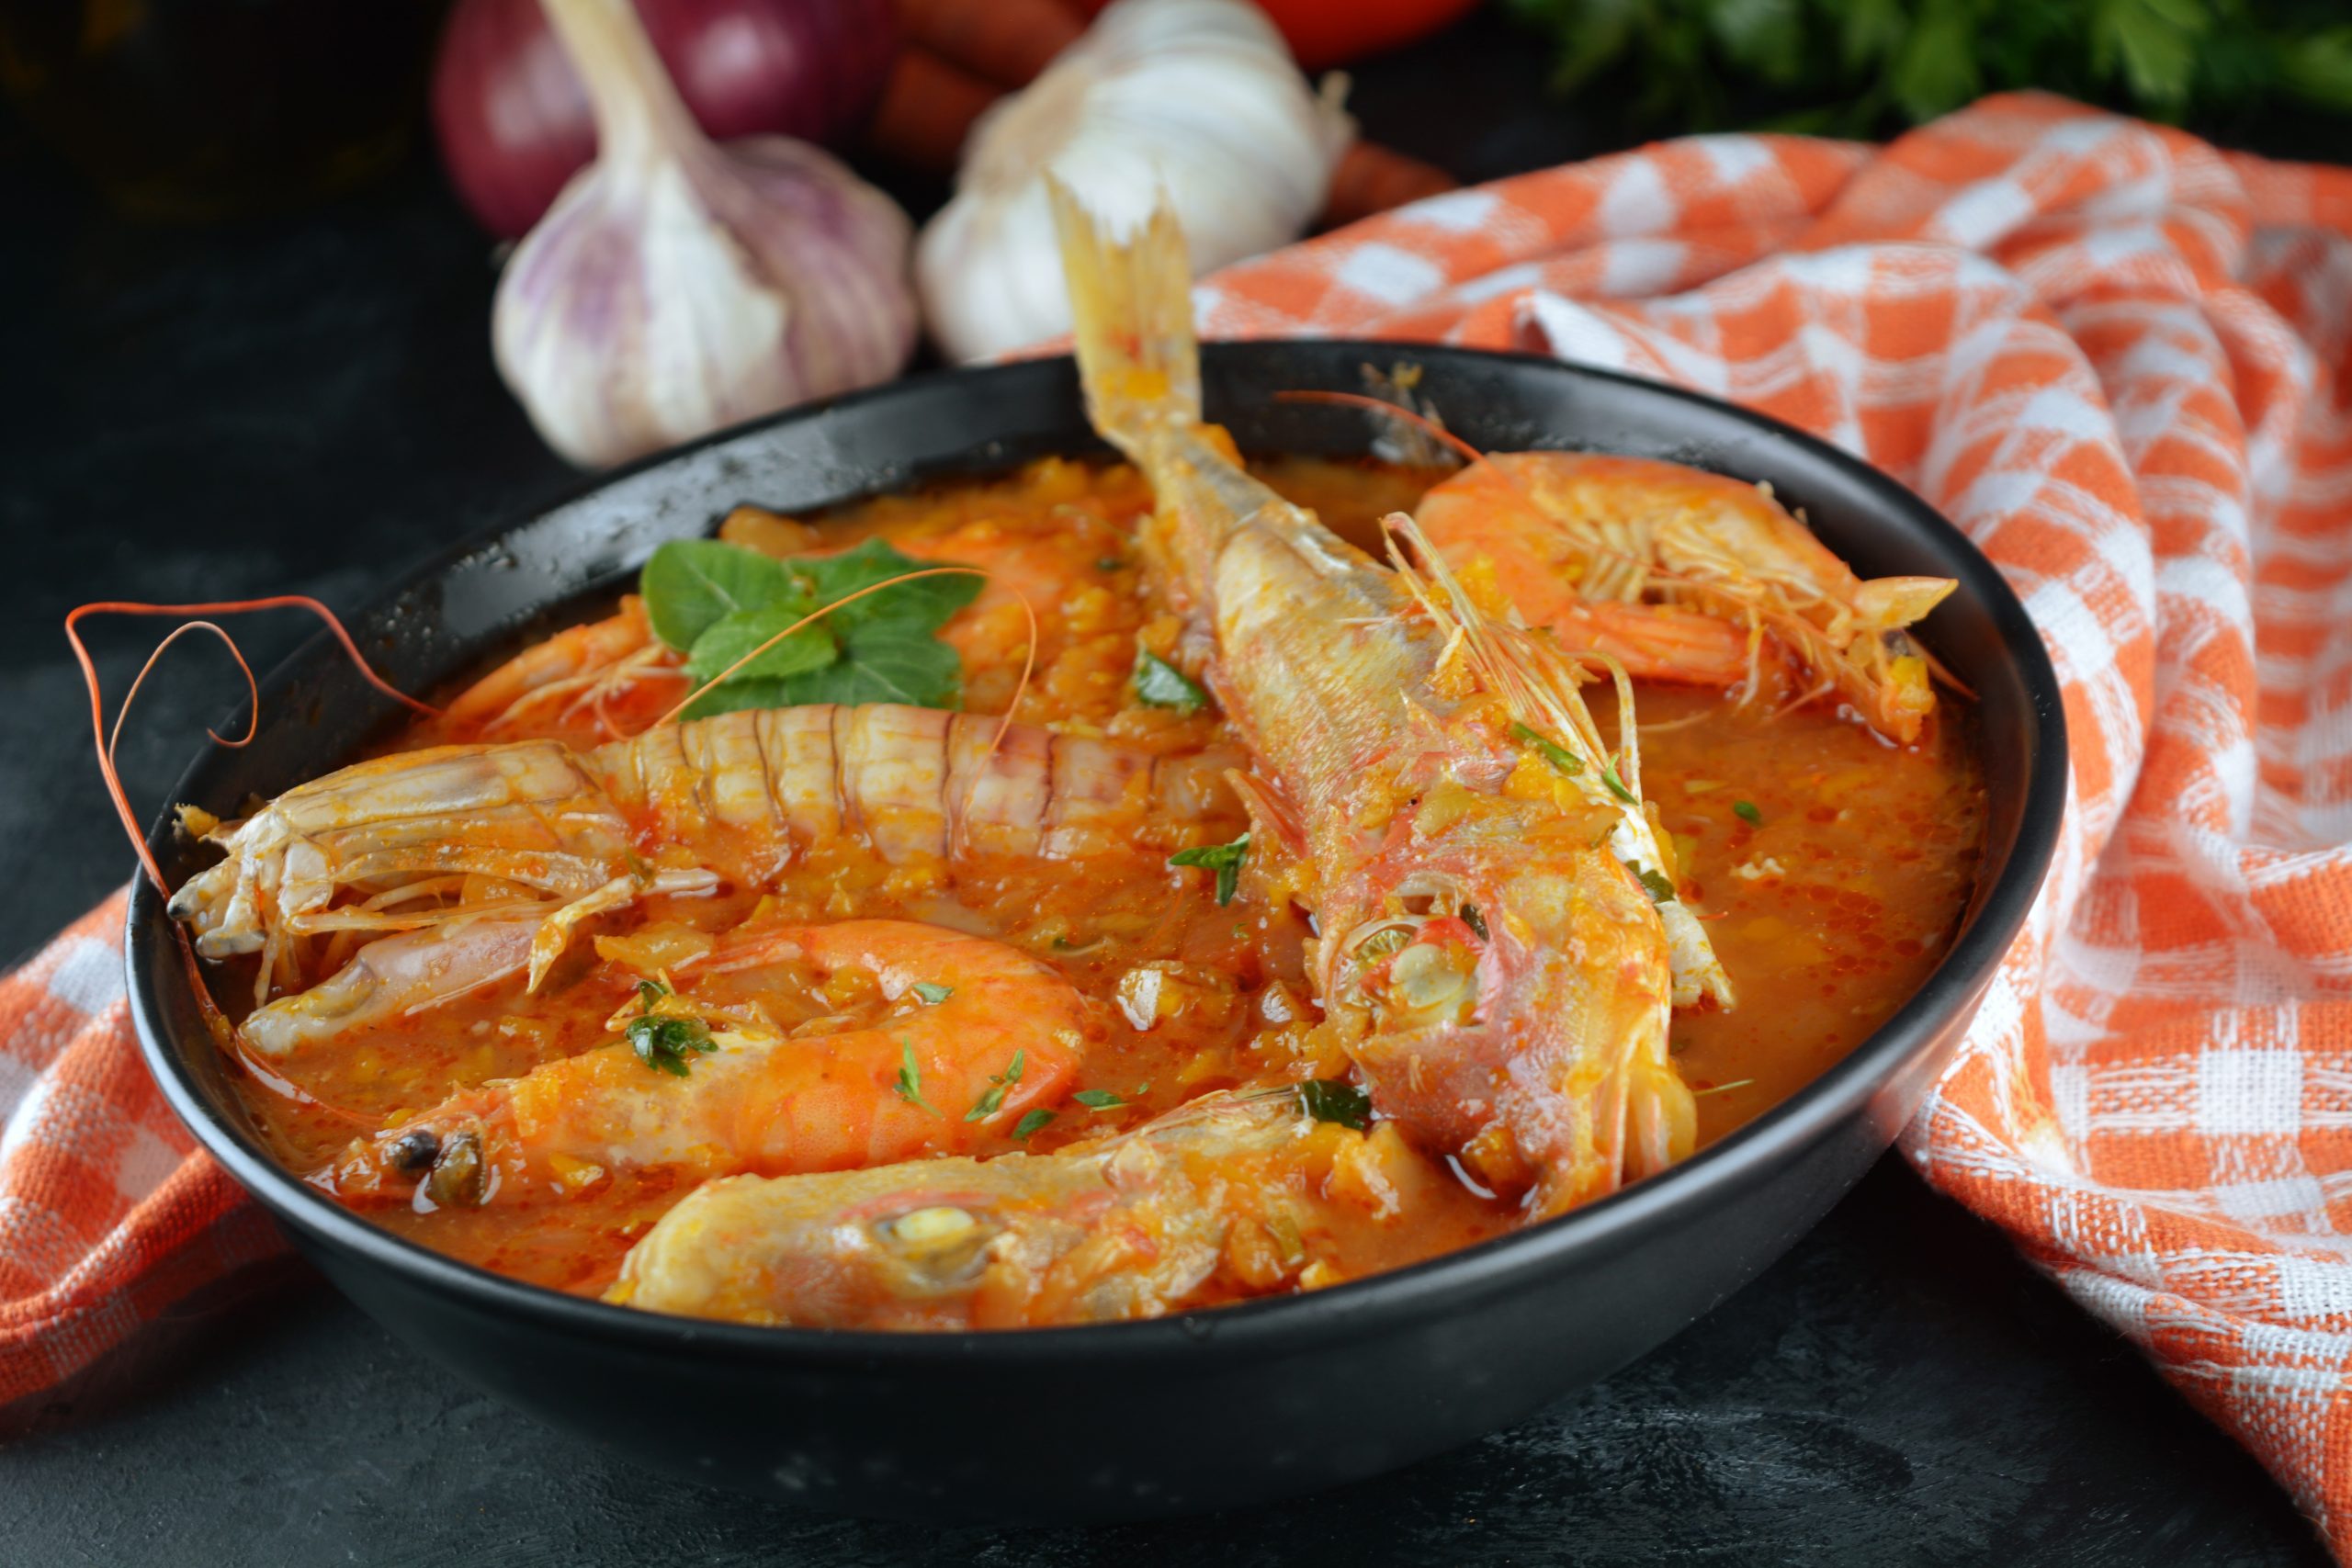 Delicious Fish and Seafood Stew recipe